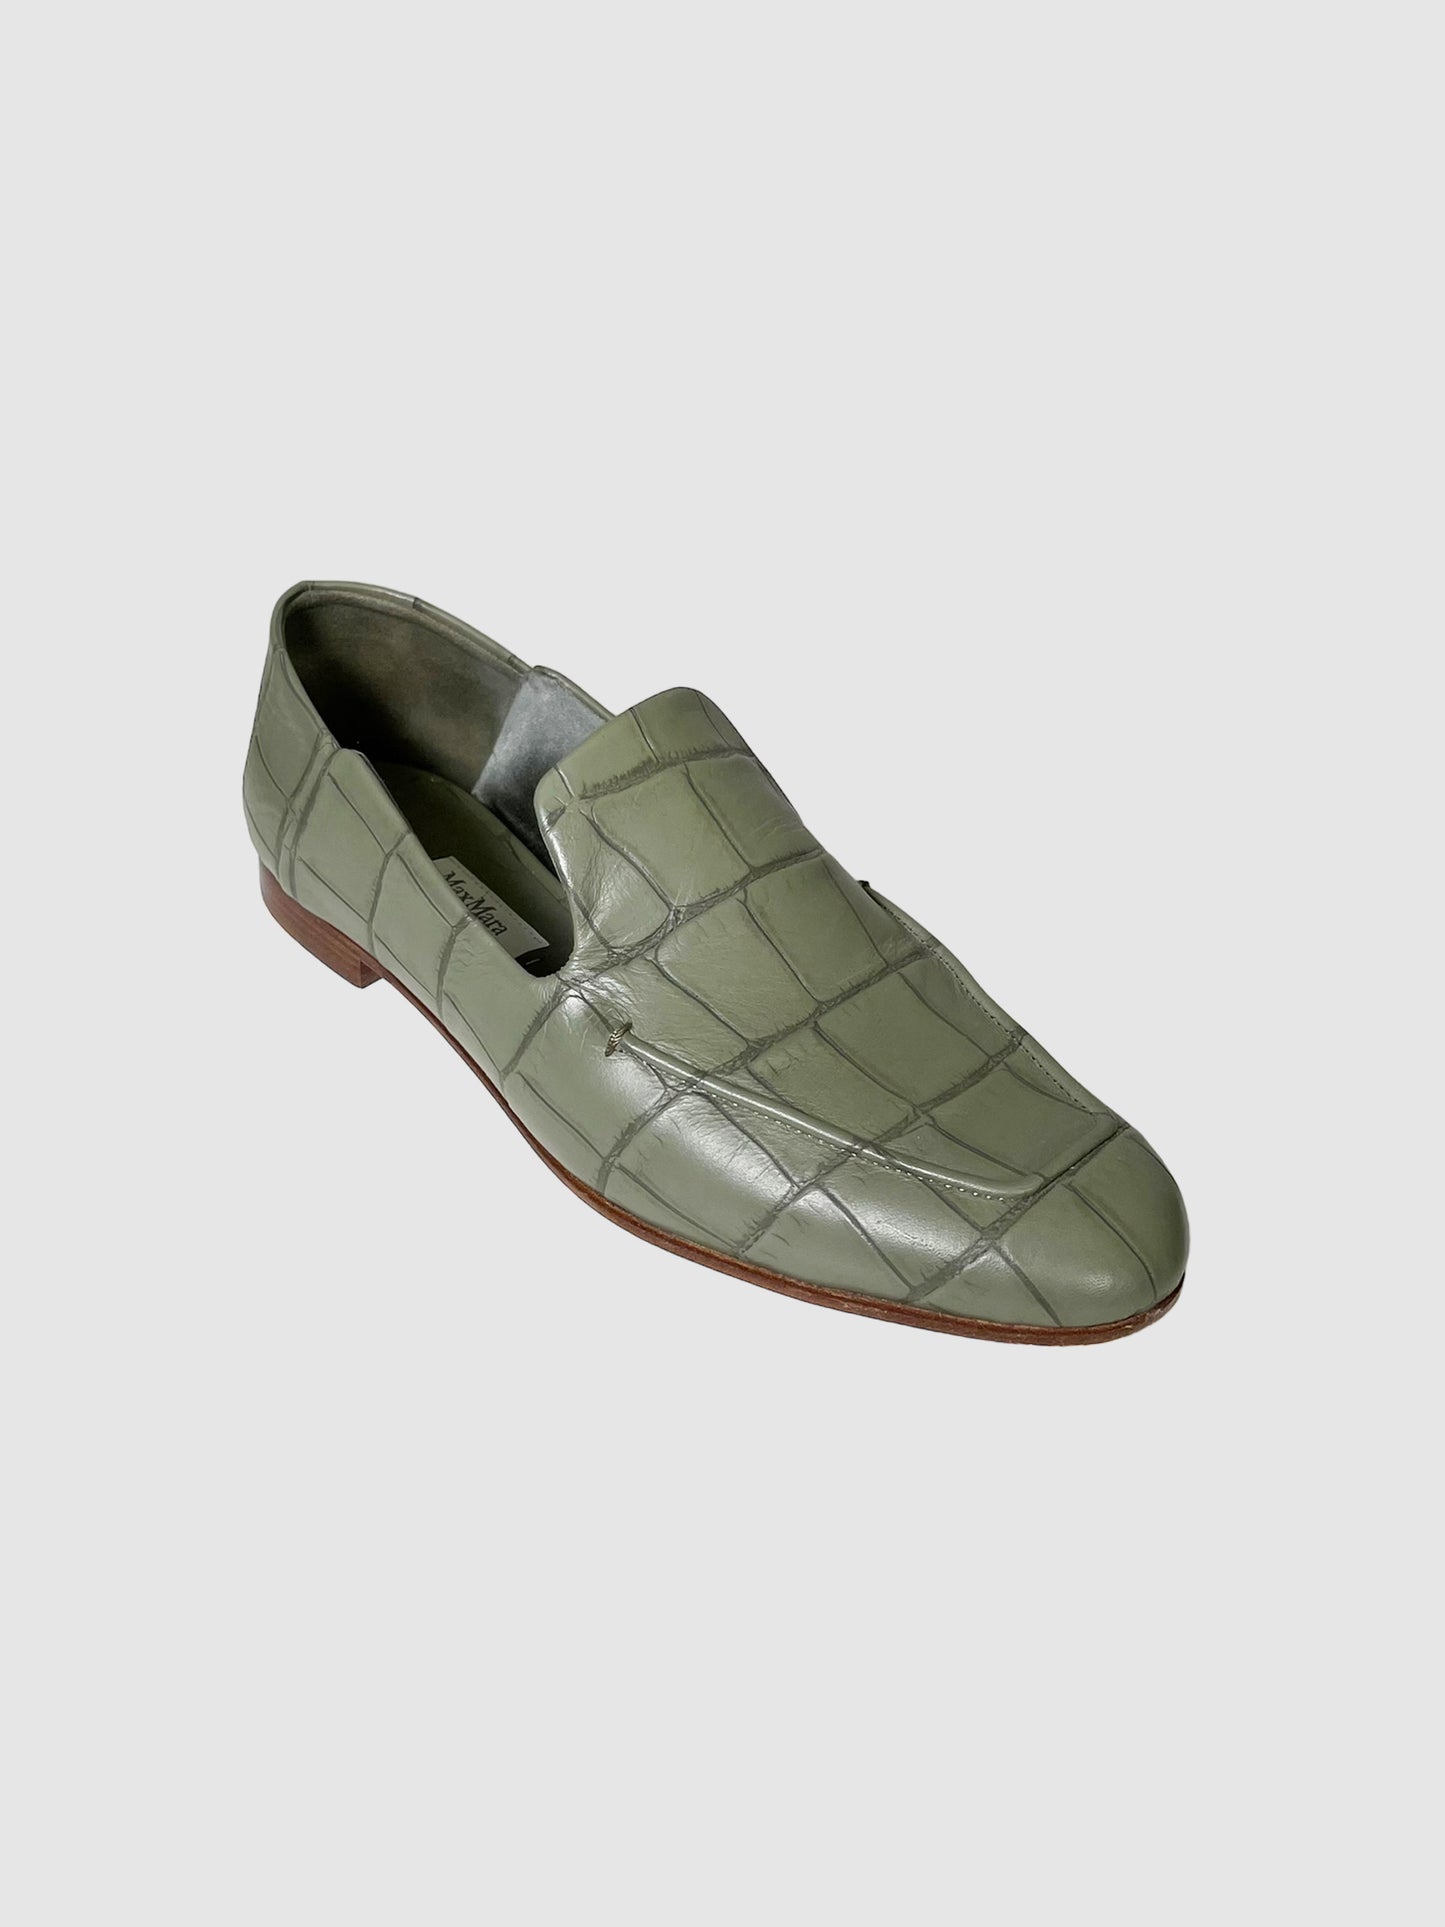 Max Mara Croc Embossed Loafers - Size 36